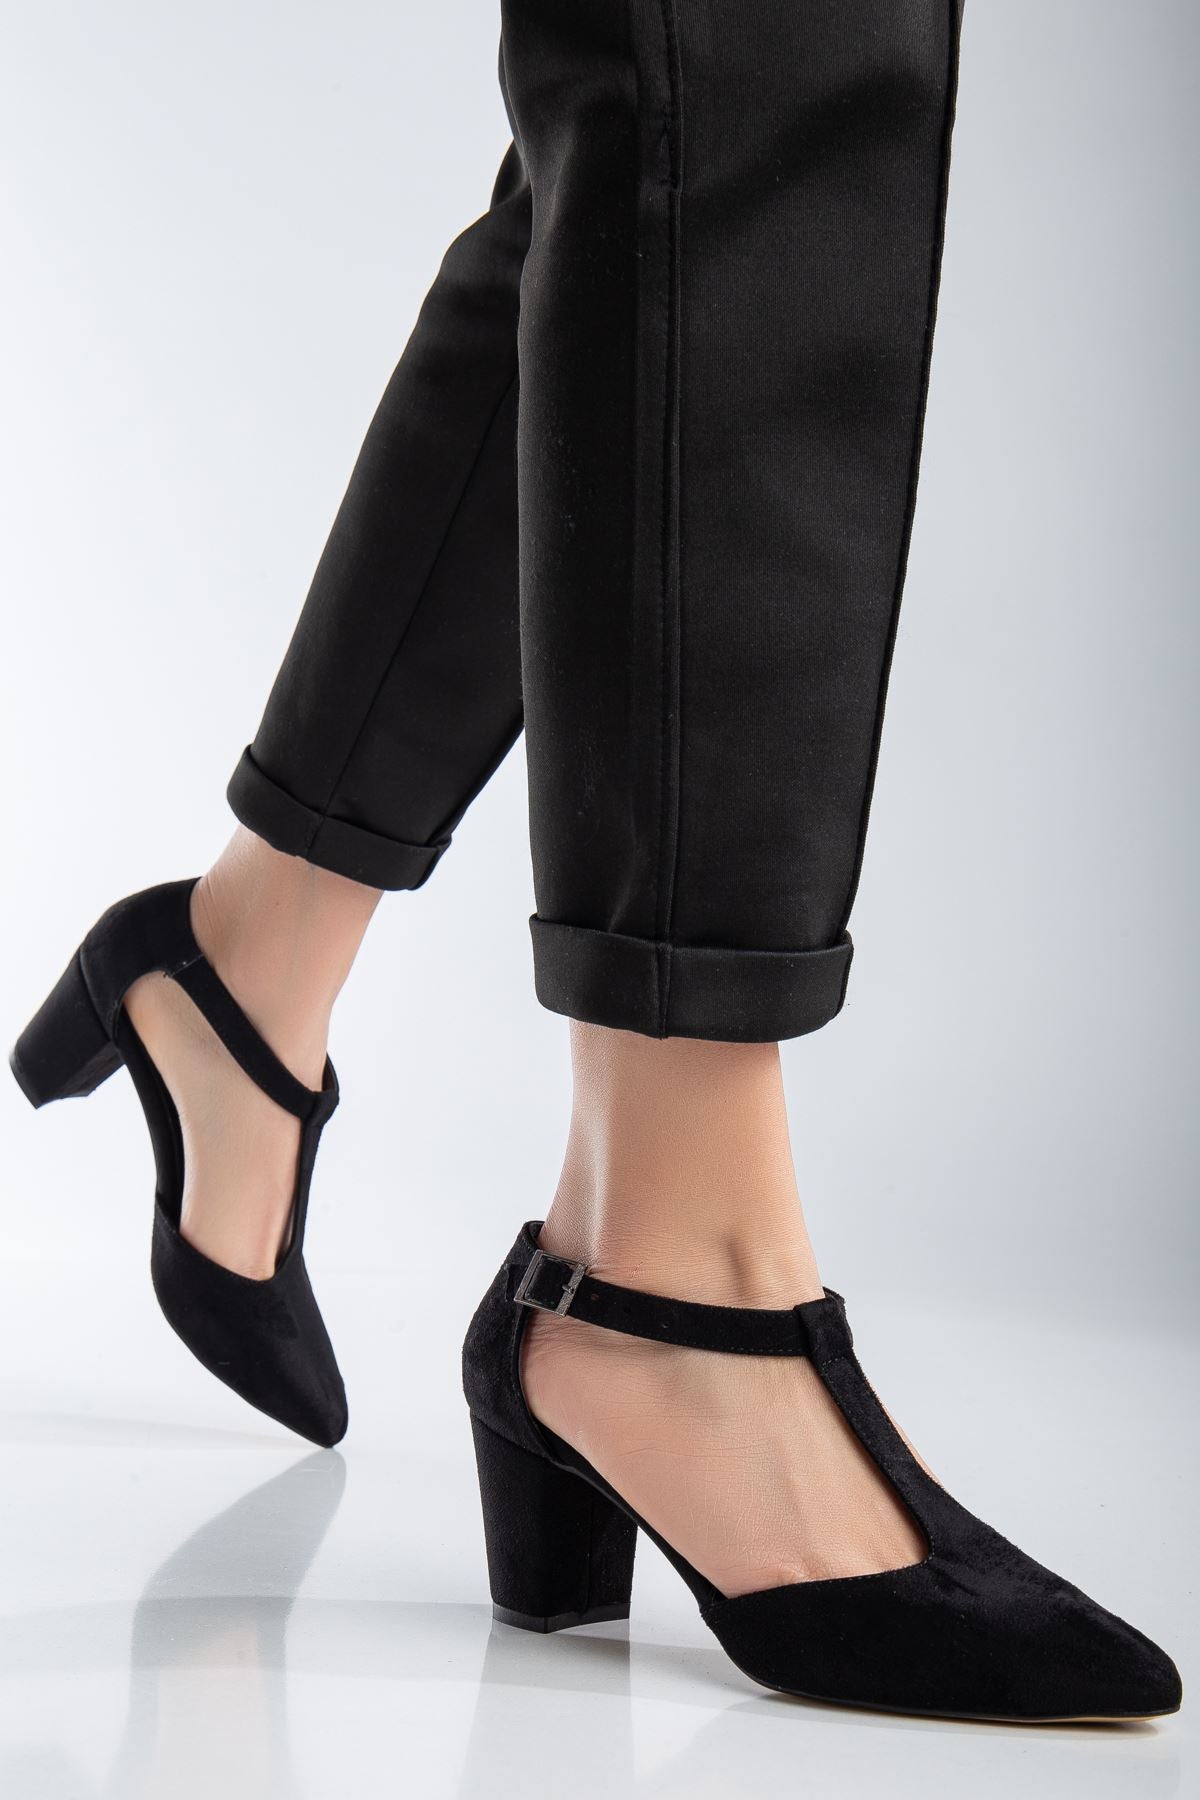 Niven Black Suede Heeled Women's Shoes - STREETMODE™